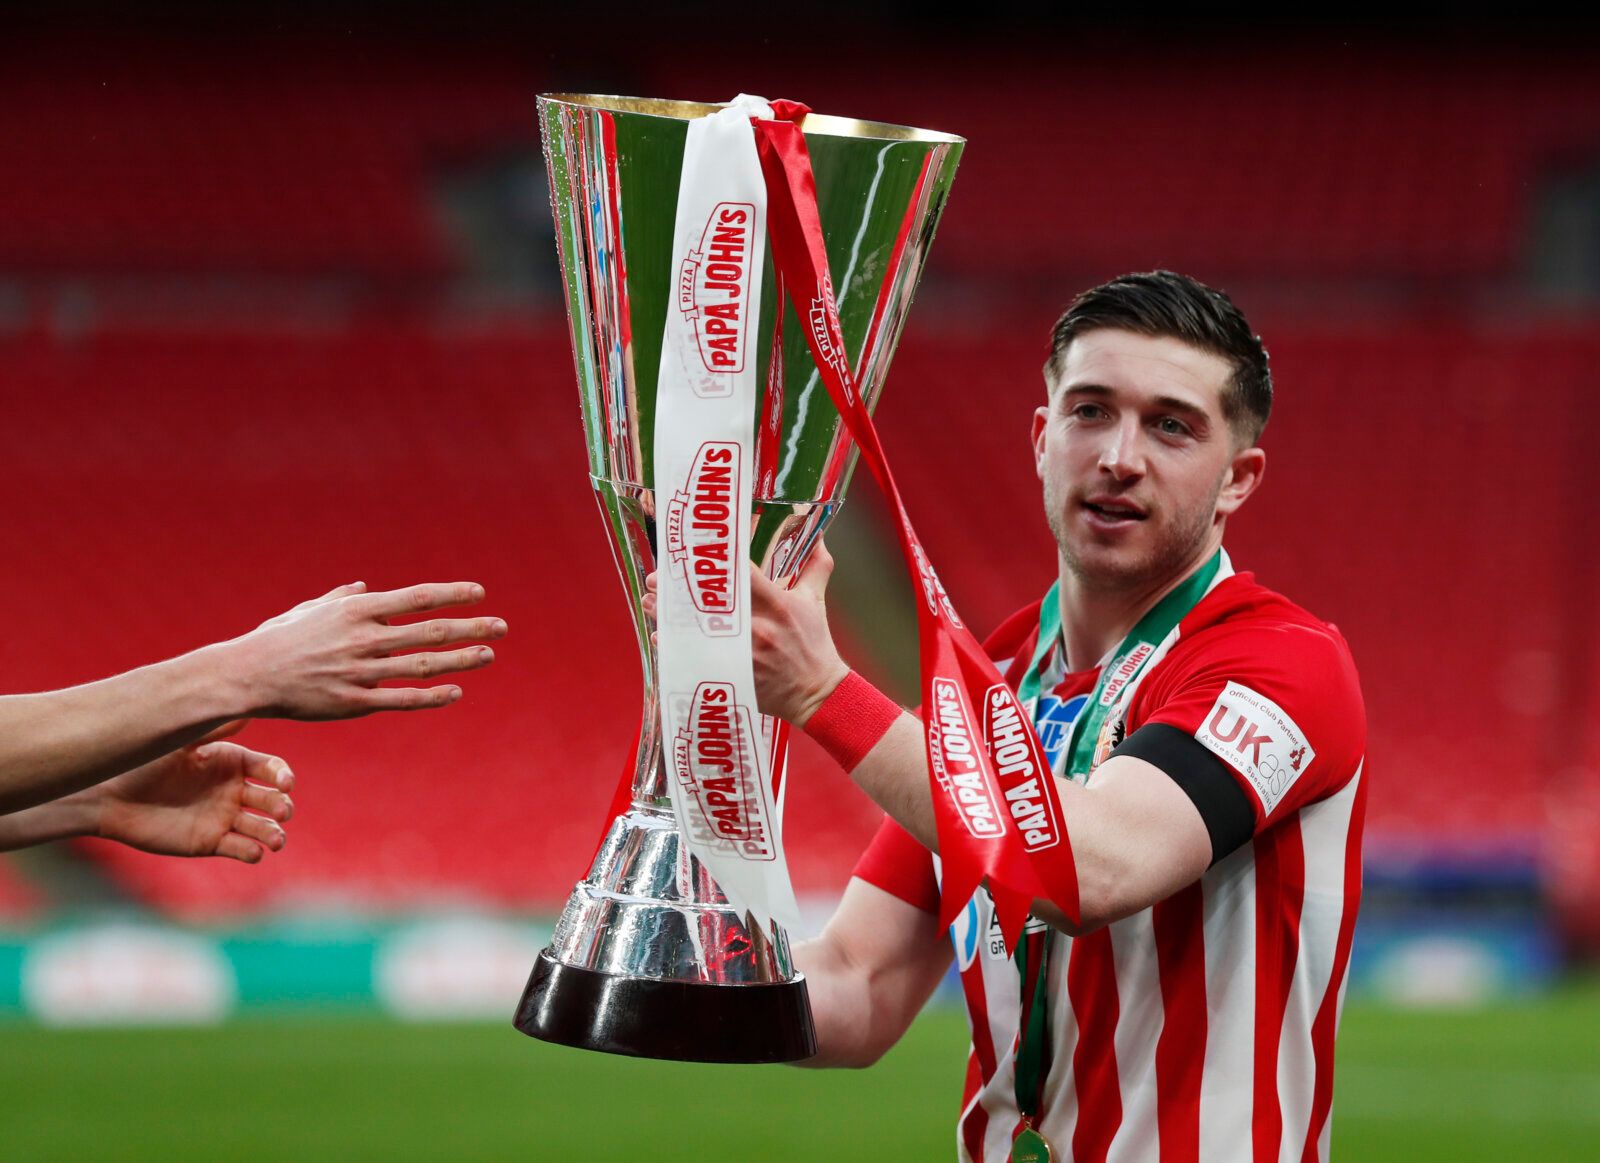 Soccer Football - EFL Trophy Final - Sunderland v Tranmere Rovers - Wembley Stadium, London, Britain - March 14, 2021 Sunderland's Lynden Gooch celebrates with the EFL Trophy after the match Action Images/Lee Smith EDITORIAL USE ONLY. No use with unauthorized audio, video, data, fixture lists, club/league logos or 'live' services. Online in-match use limited to 75 images, no video emulation. No use in betting, games or single club /league/player publications.  Please contact your account represe